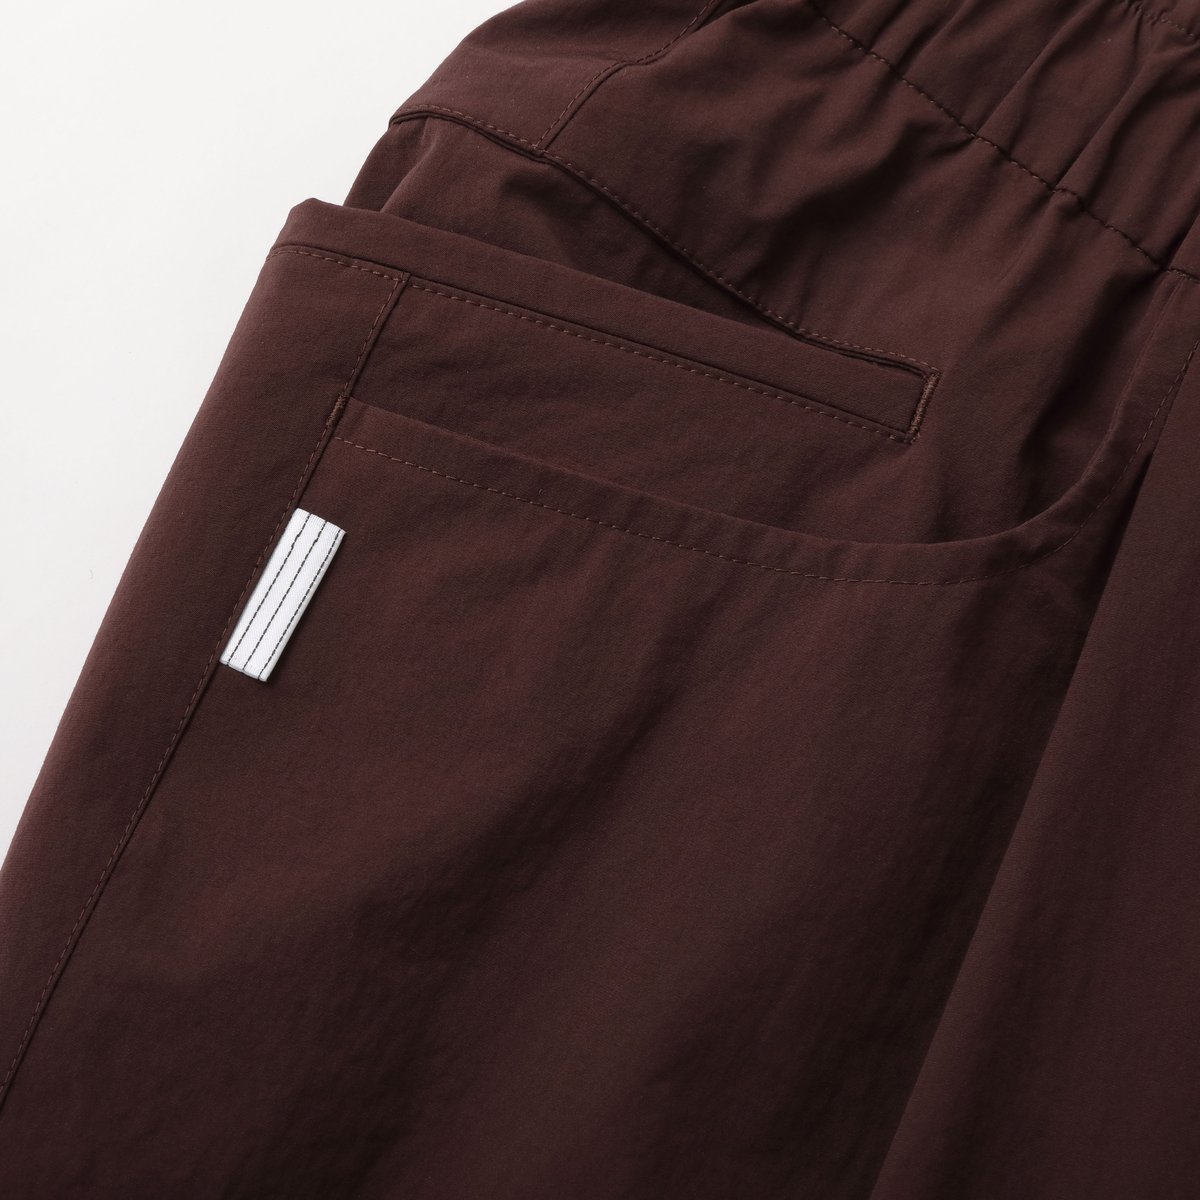 S.F.C WIDE TAPERED EASY PANTS (NYLON) Maroon【SF...